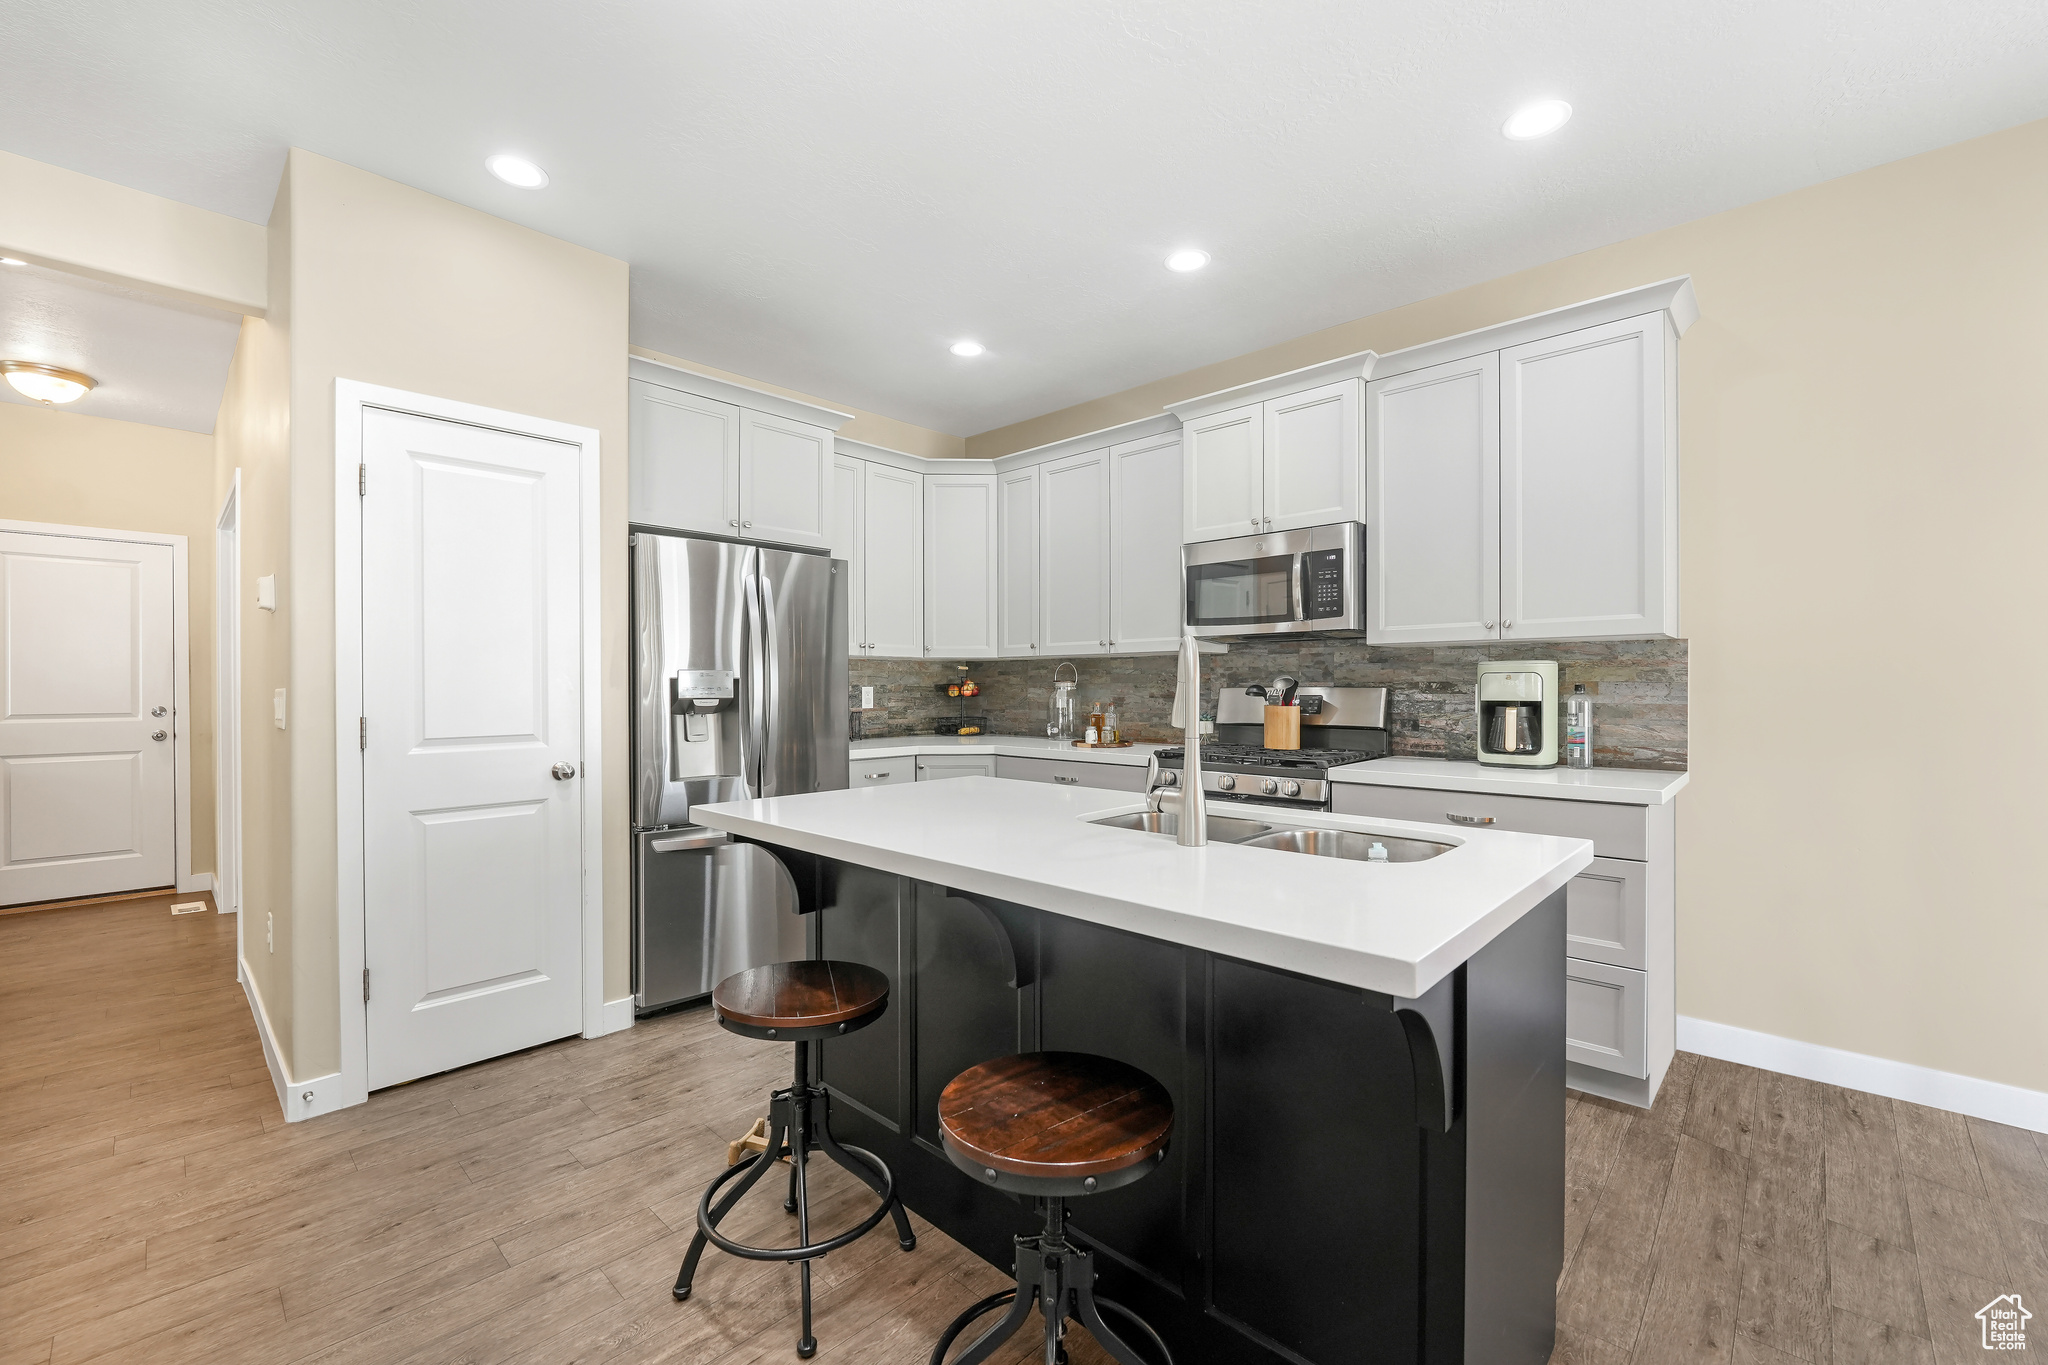 Kitchen featuring appliances with stainless steel finishes, backsplash, light wood-type flooring, and white cabinetry